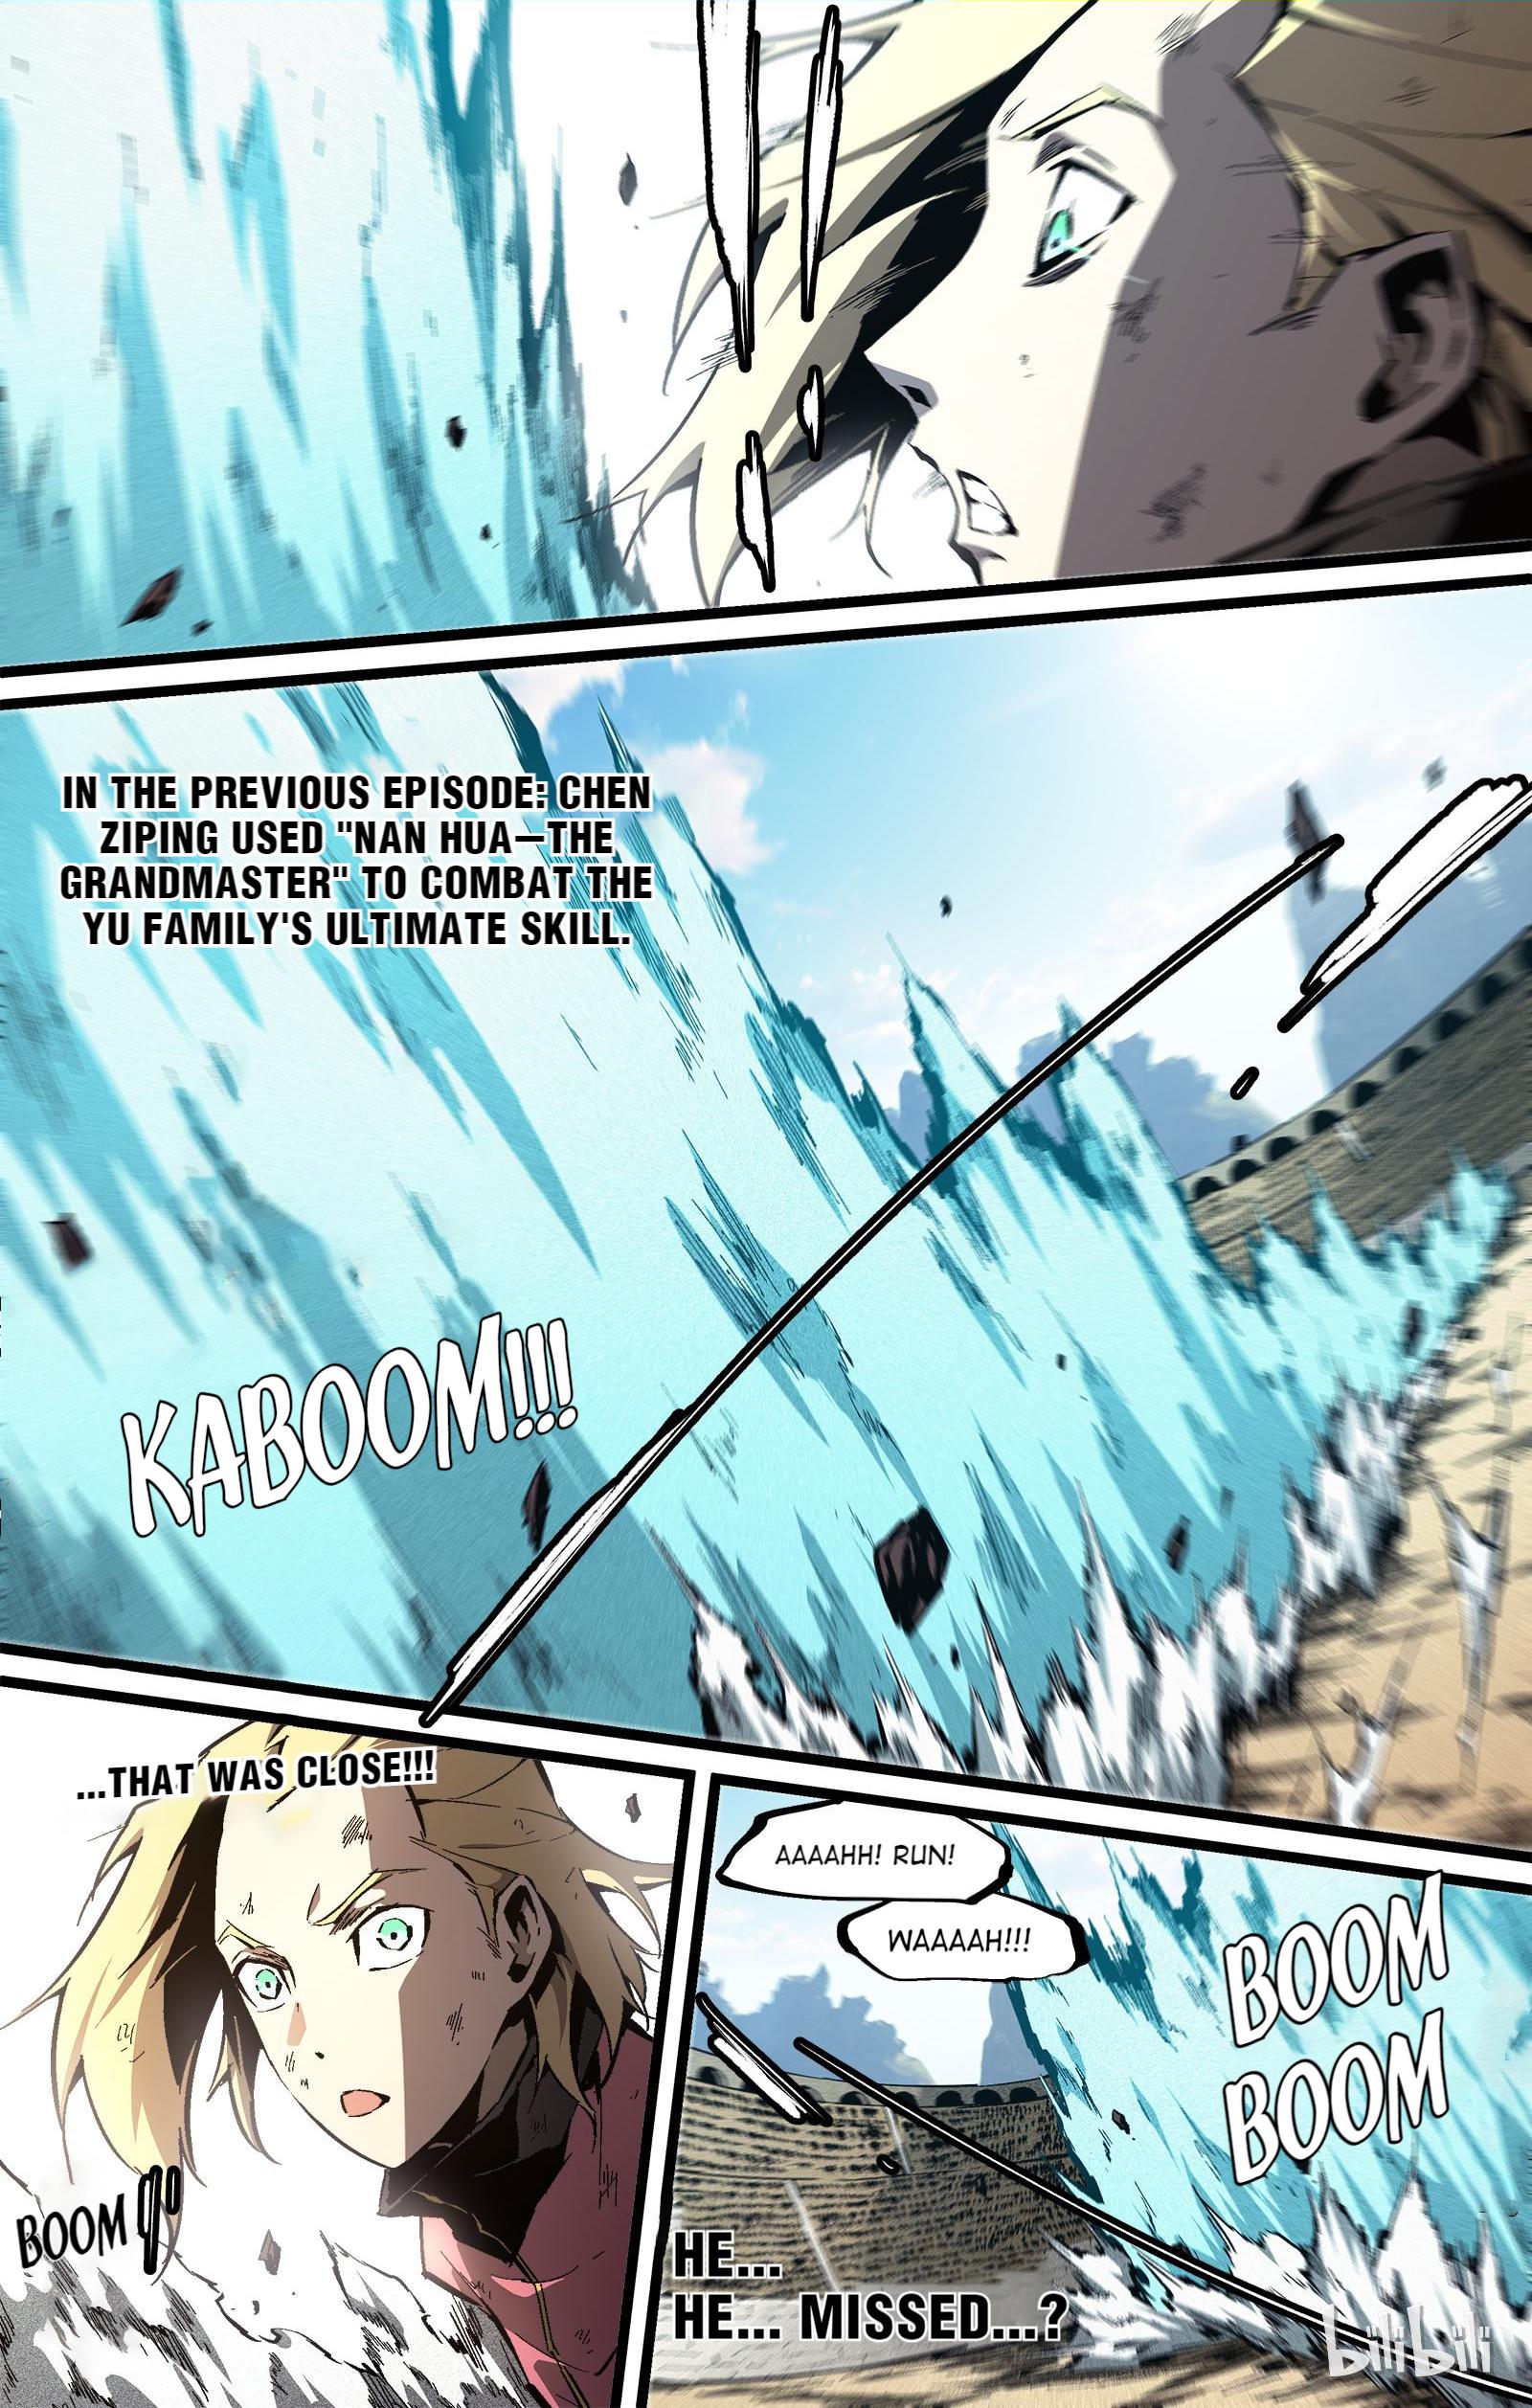 Lawless Zone Chapter 88 - Page 1